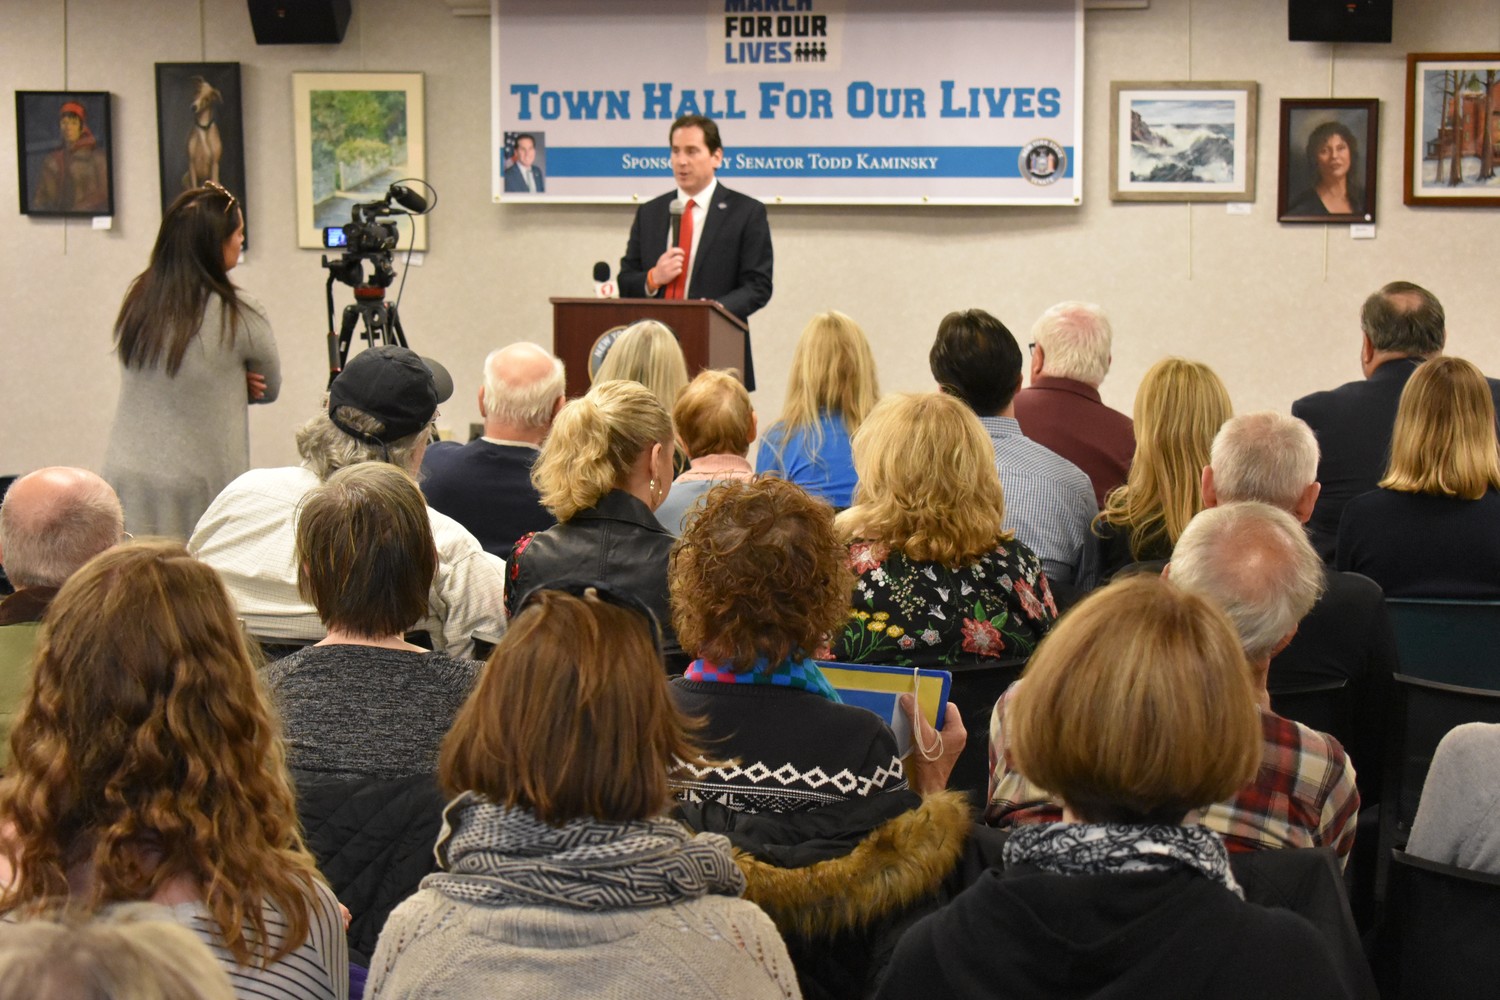 More than 100 people attended the Town Hall For Our Lives event at the Rockville Centre Public Library last Saturday.